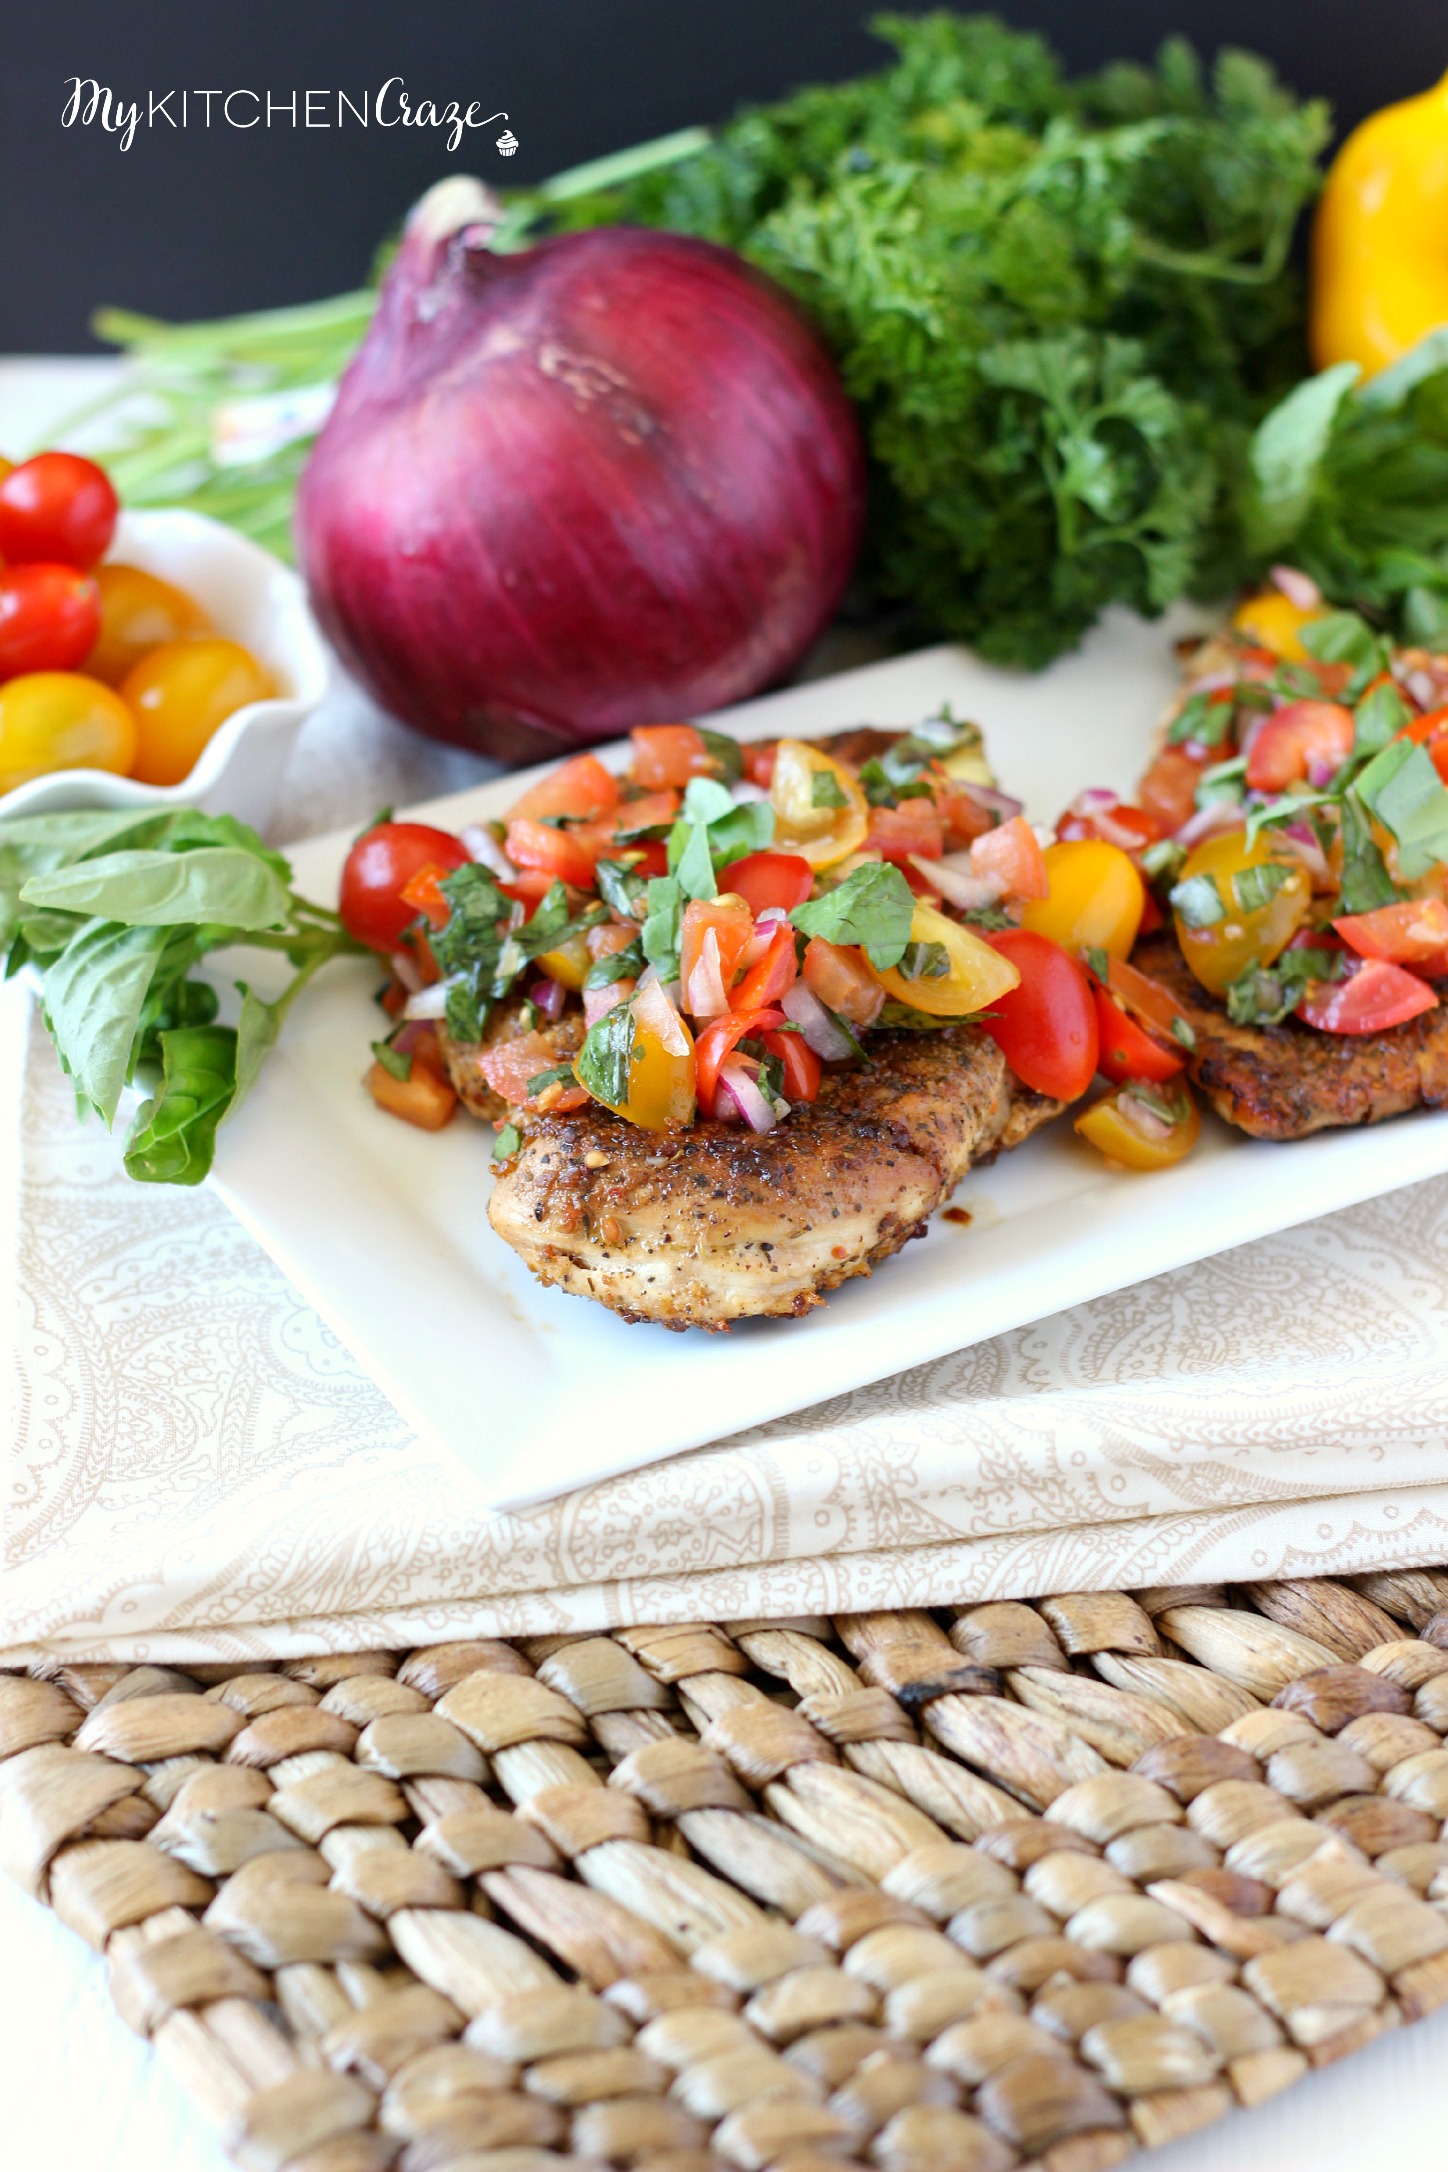 Bruschetta Chicken ~ mykitchencraze.com ~ A delicious and flavorful meal that the whole family will love.